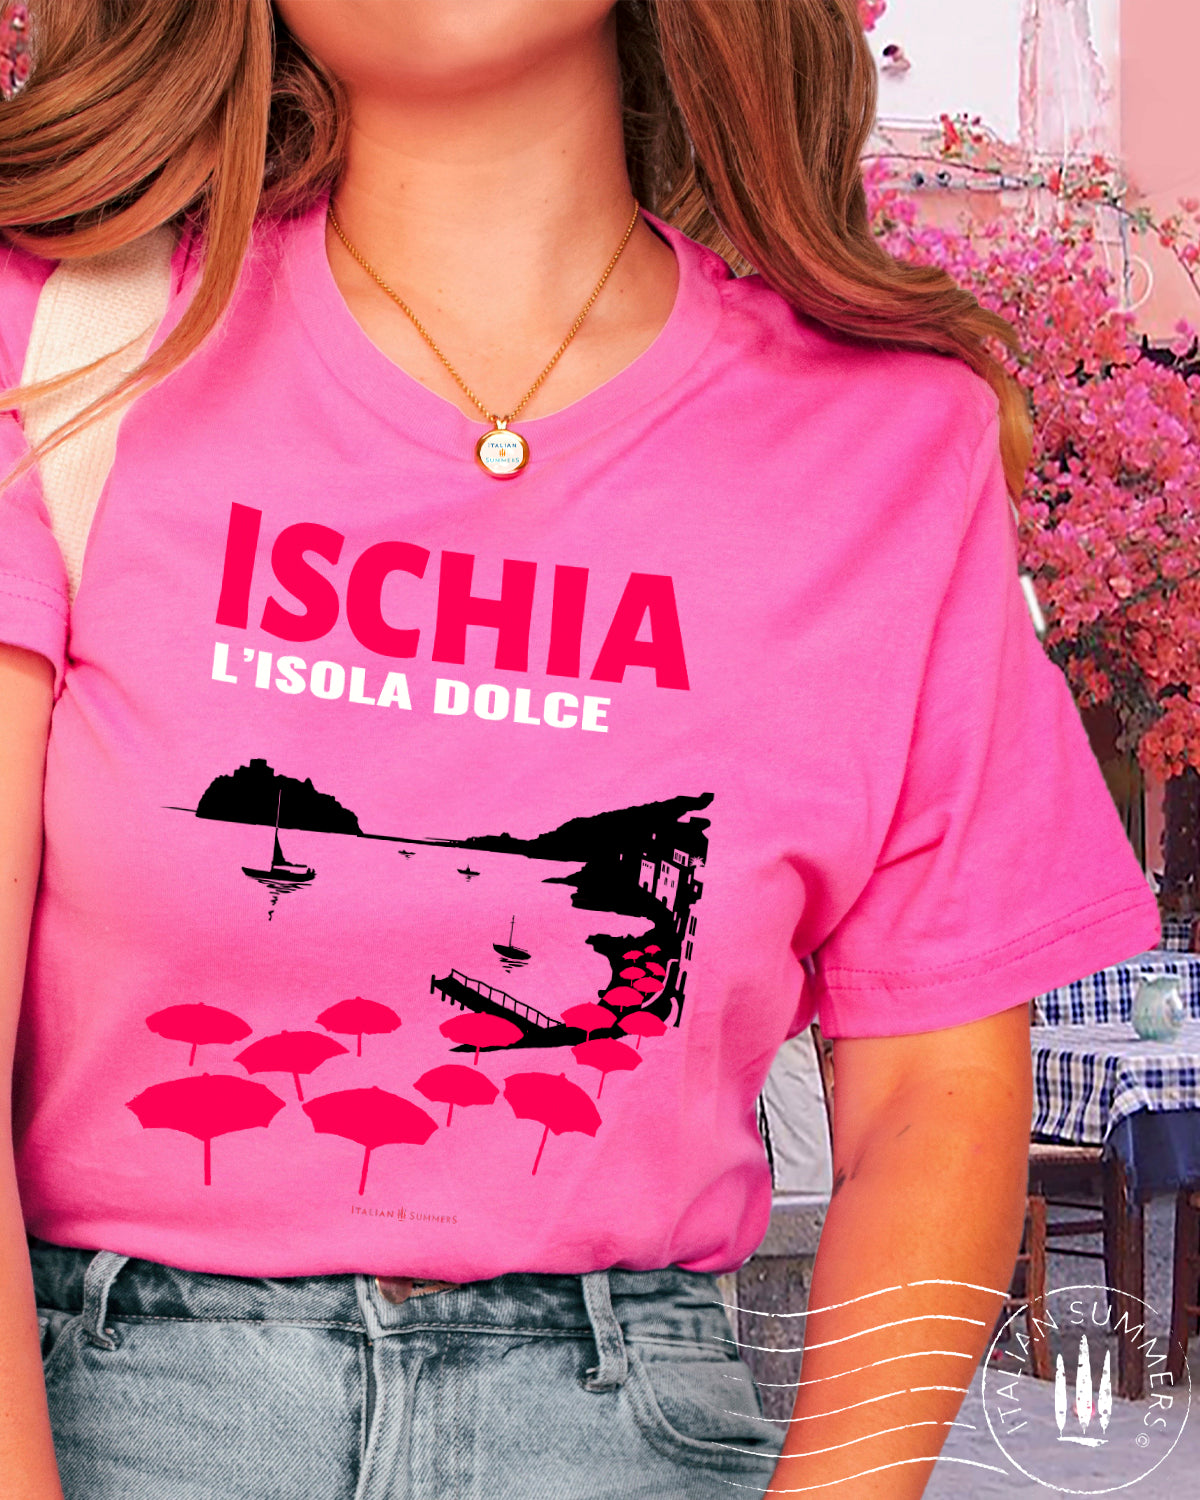 Italy Inspired garment dyed T Shirt with the text: ISCHIA L'isola dolce (Ischia, the sweet island)  with the print of the island's beach with the famous Aragonese Castle in the backround, with colored beach umbrellas strewn in the foreground. Made by Italian Summers